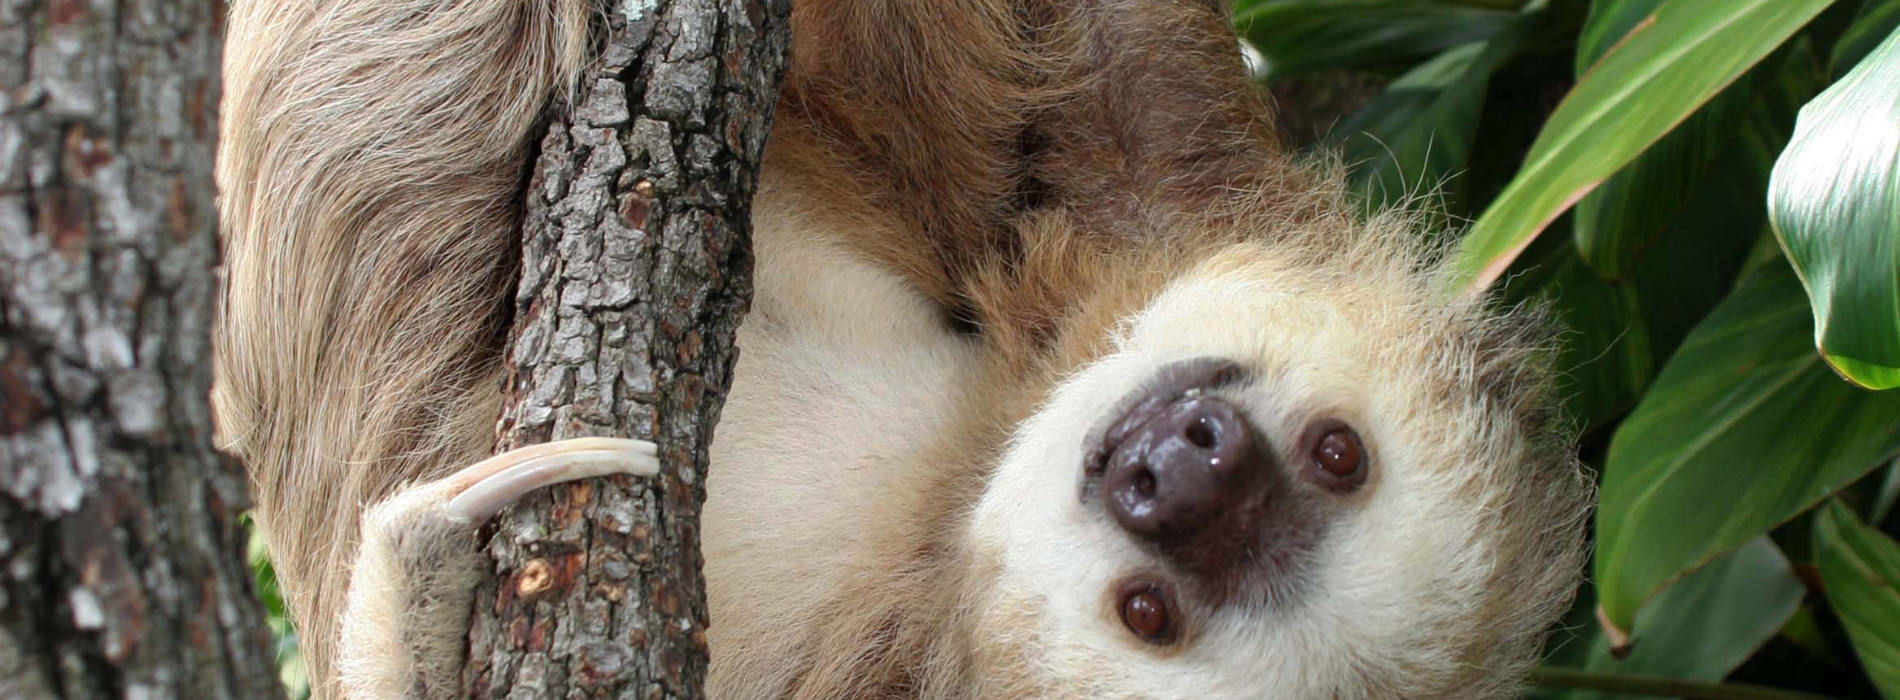 Hoffmans Two-Toed Sloth